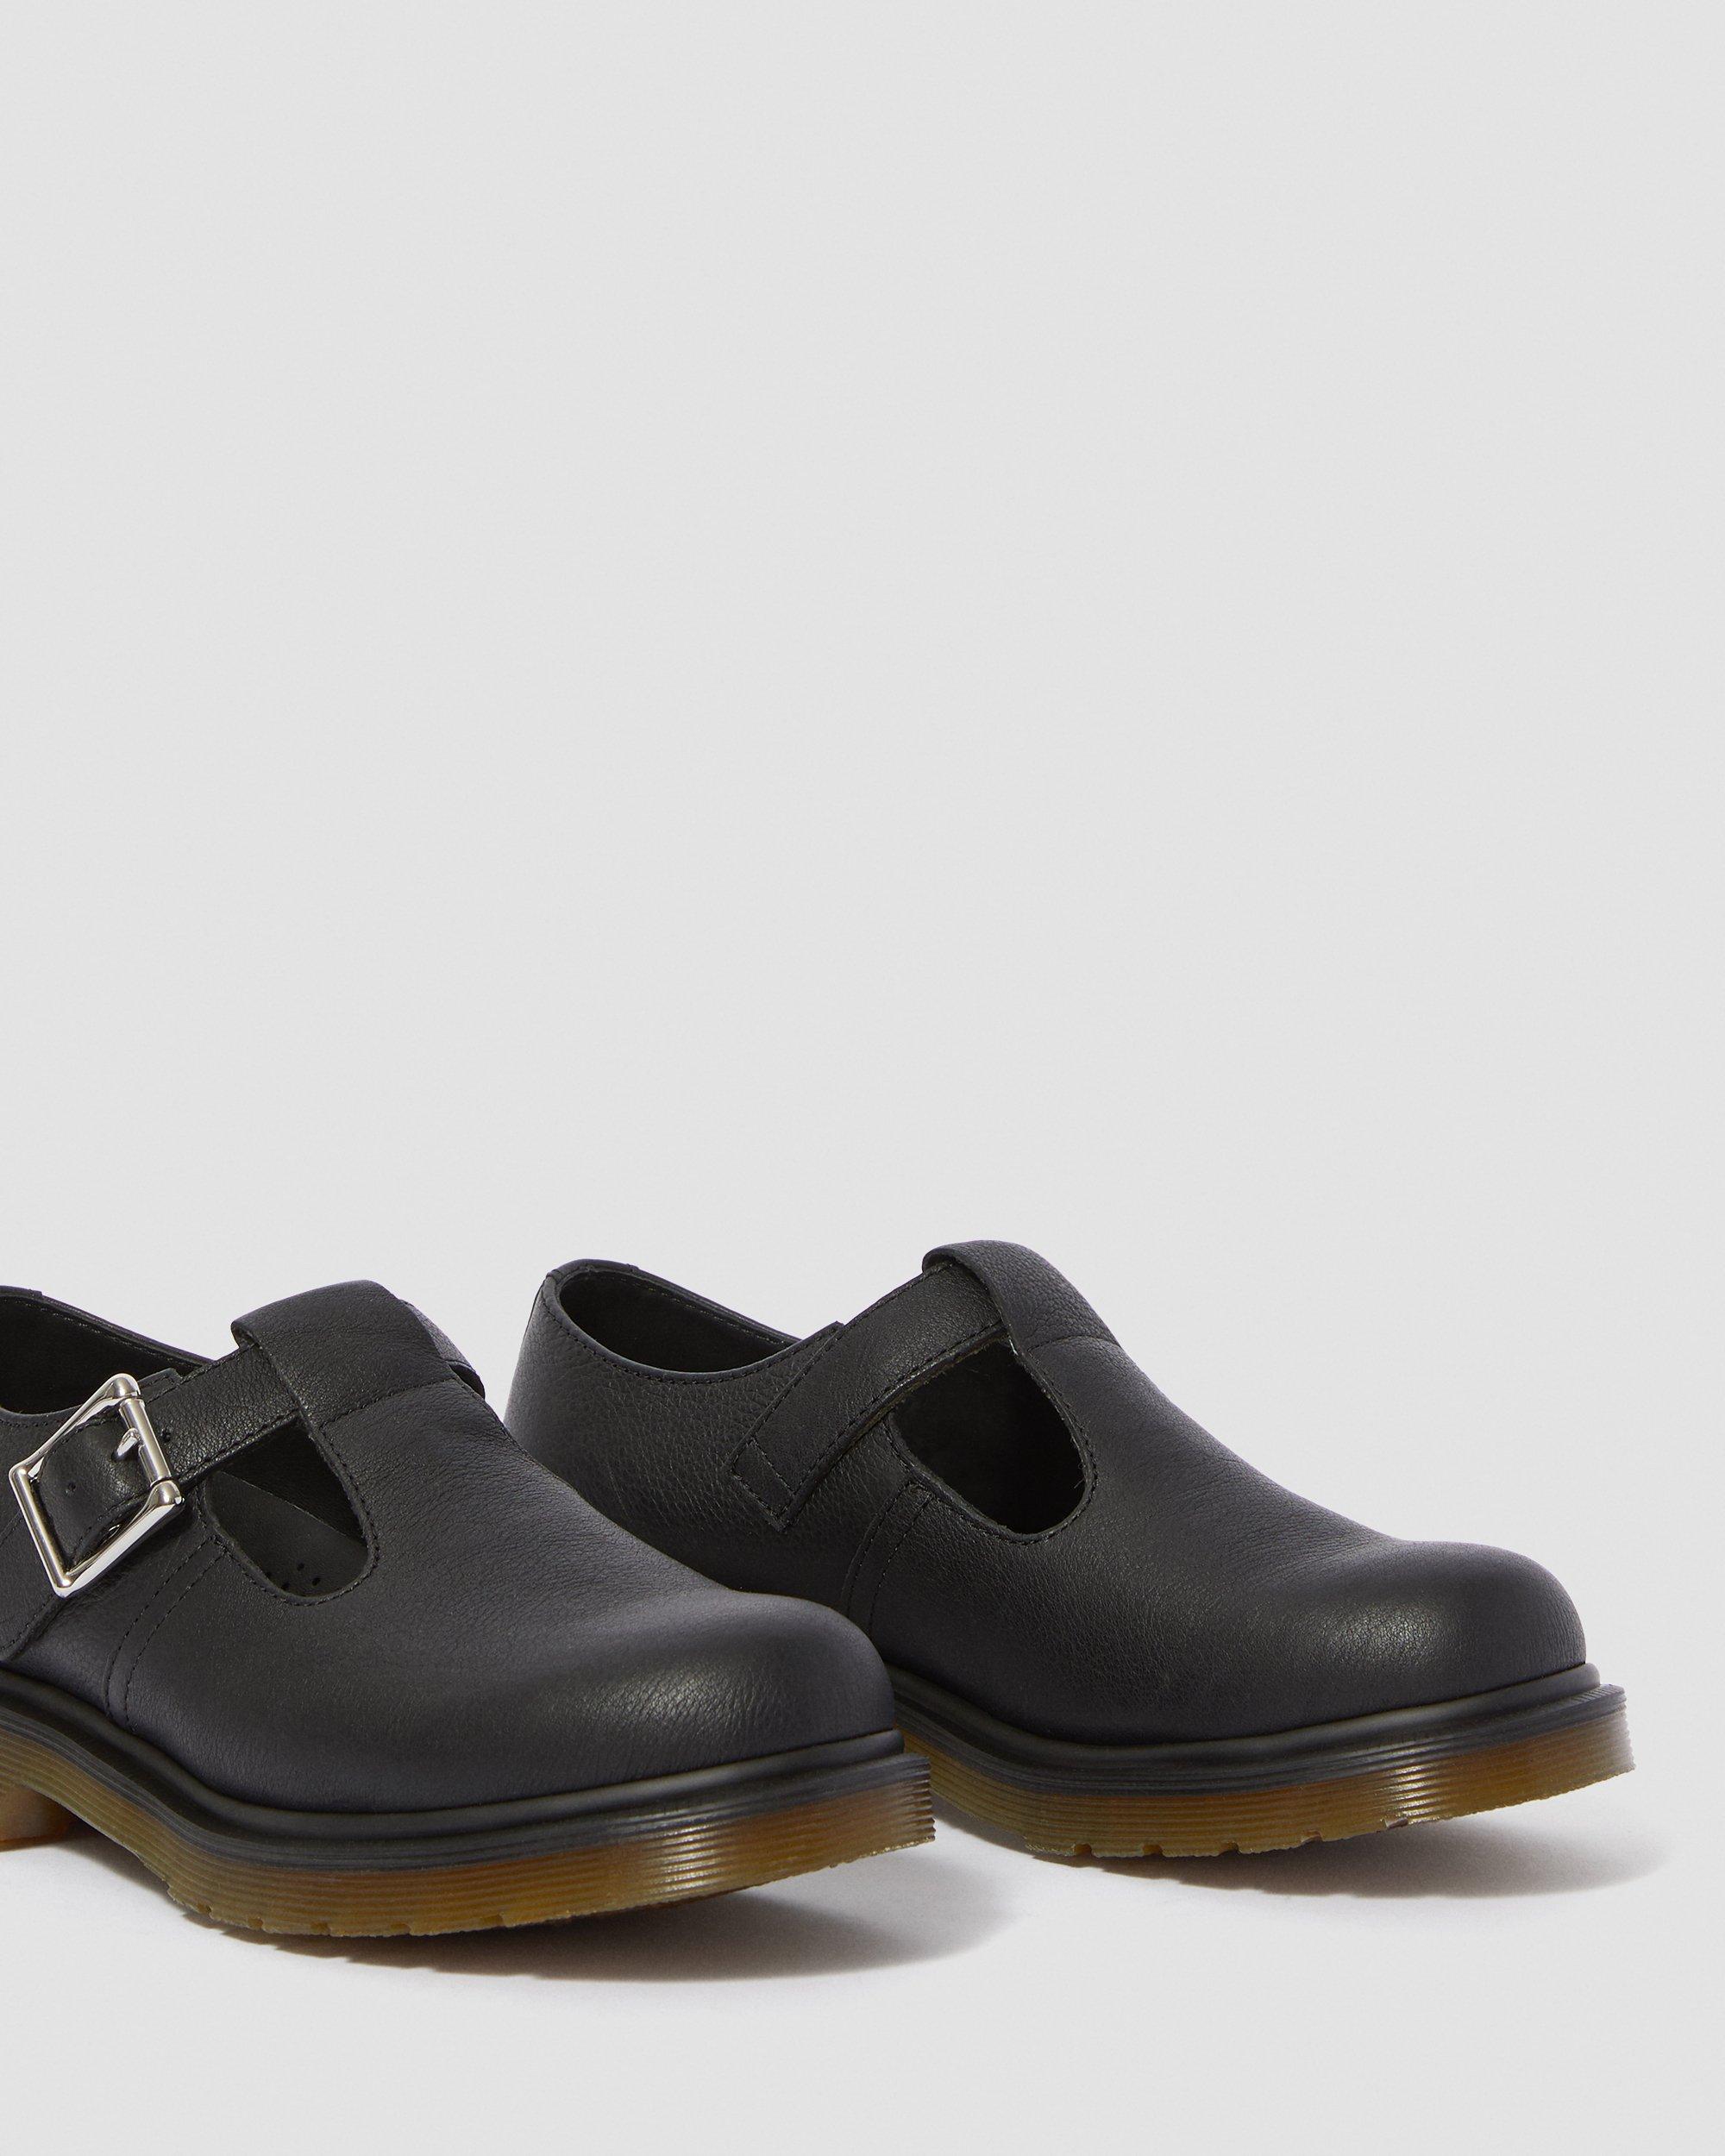 POLLEY LEREN MARY JANES Dr. Martens